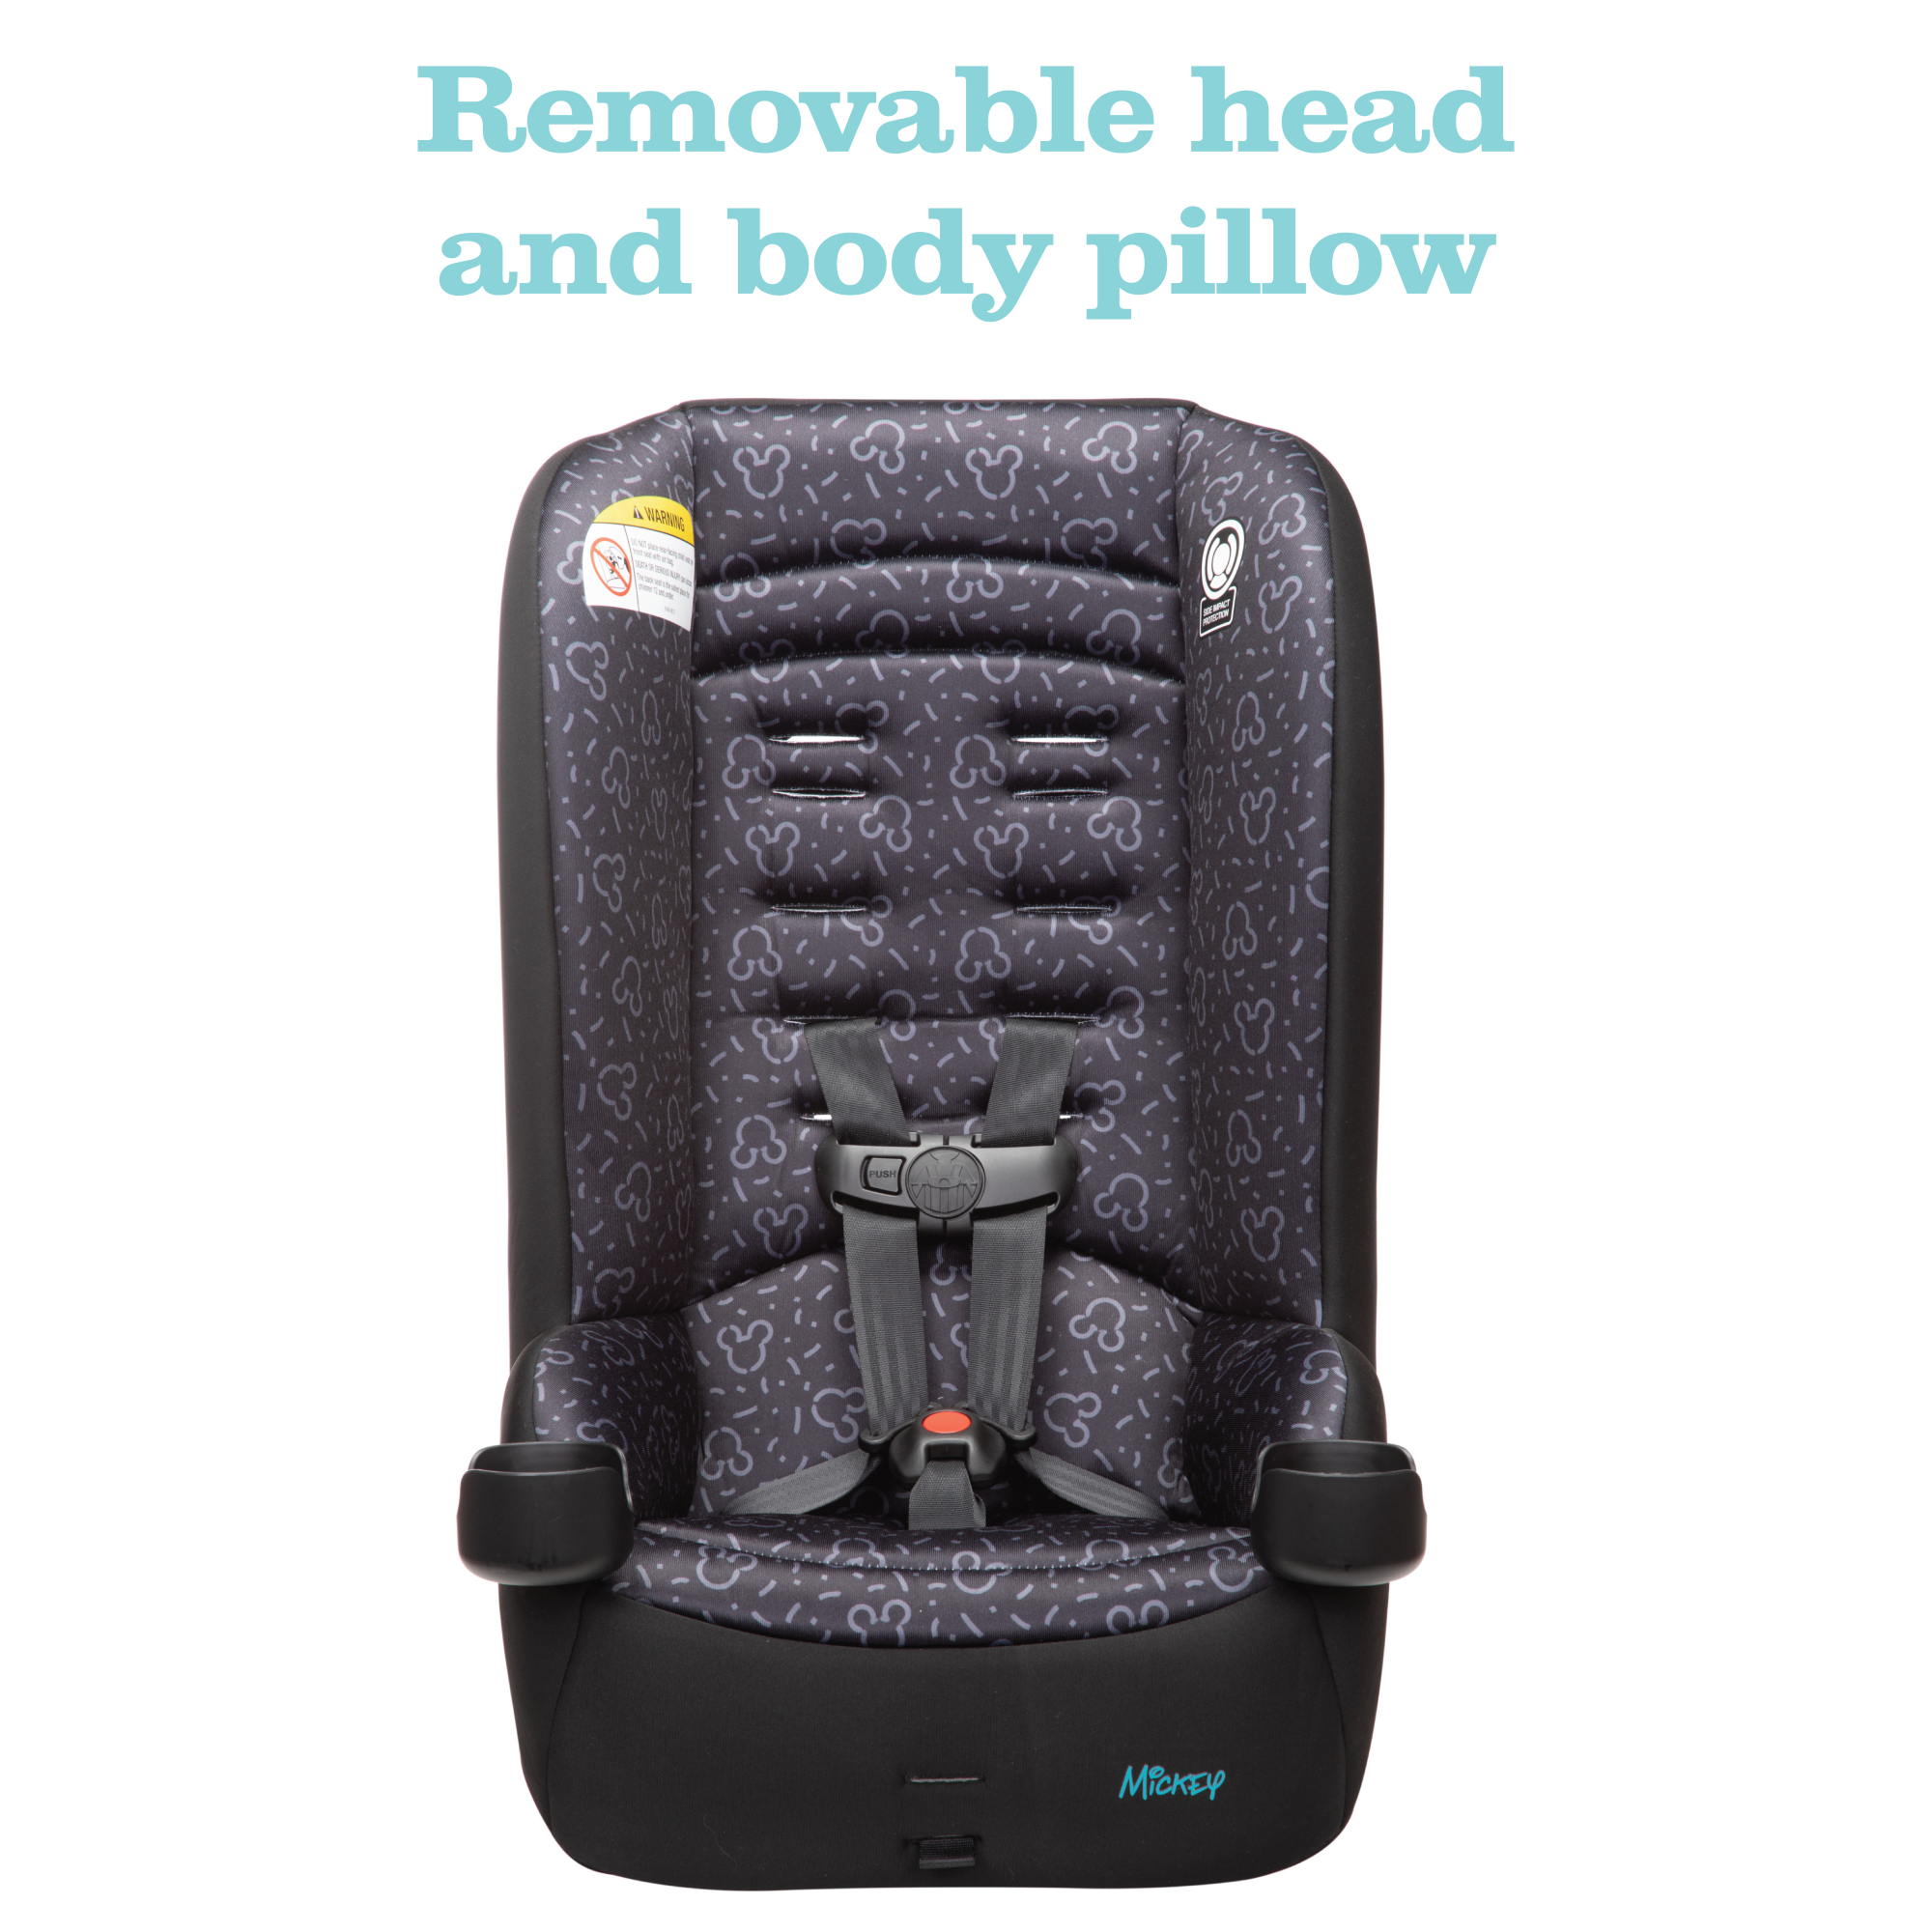 Disney Baby Jive 2-in-1 Convertible Car Seat - removable head and body pillow